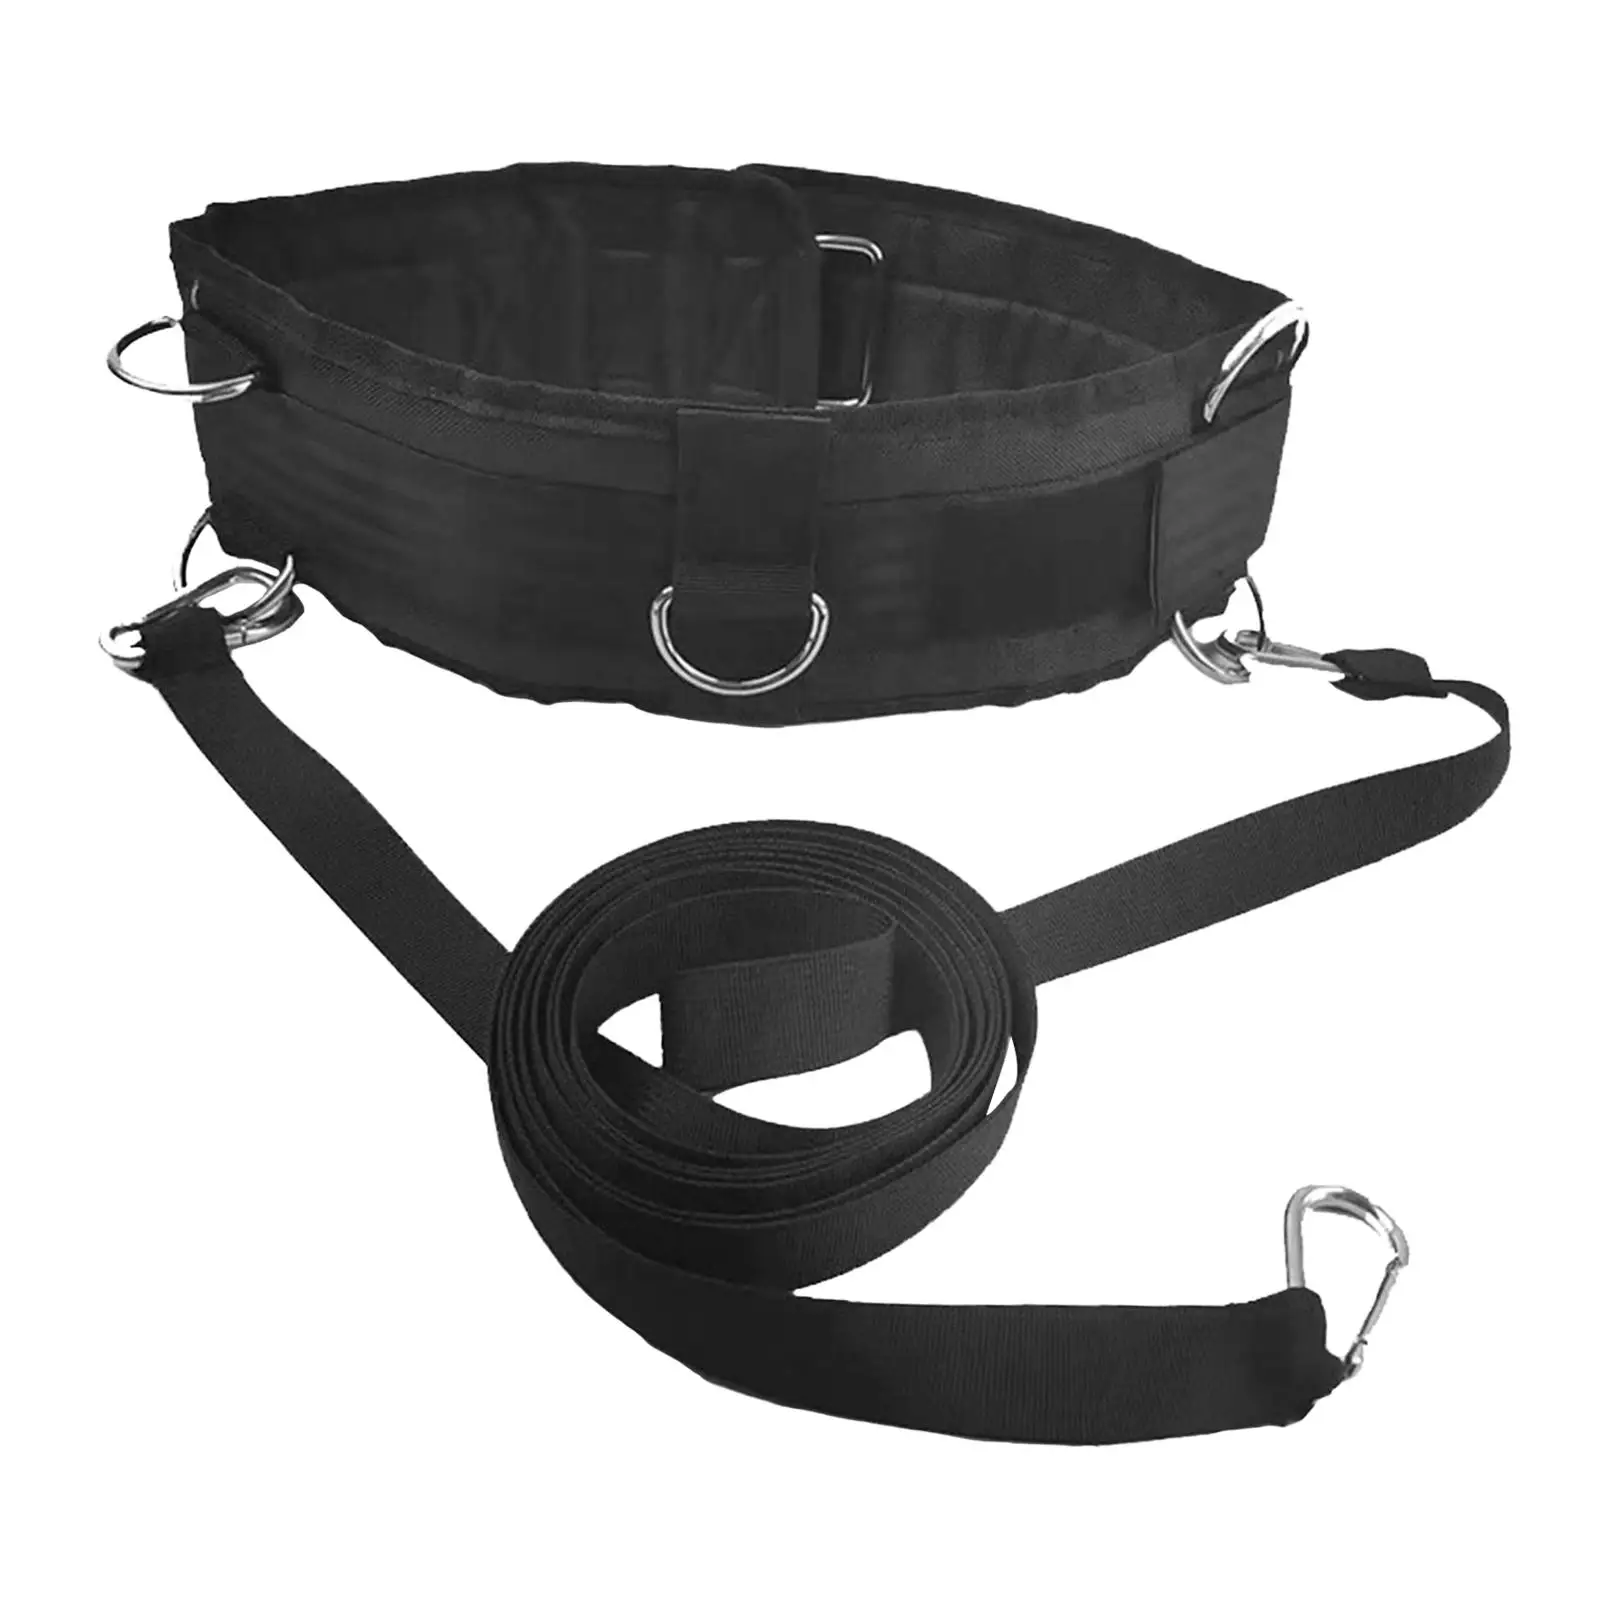 Gym Pulley Strap with Rings Gym Fitness Exercise Waist Belt for Pulling Sled